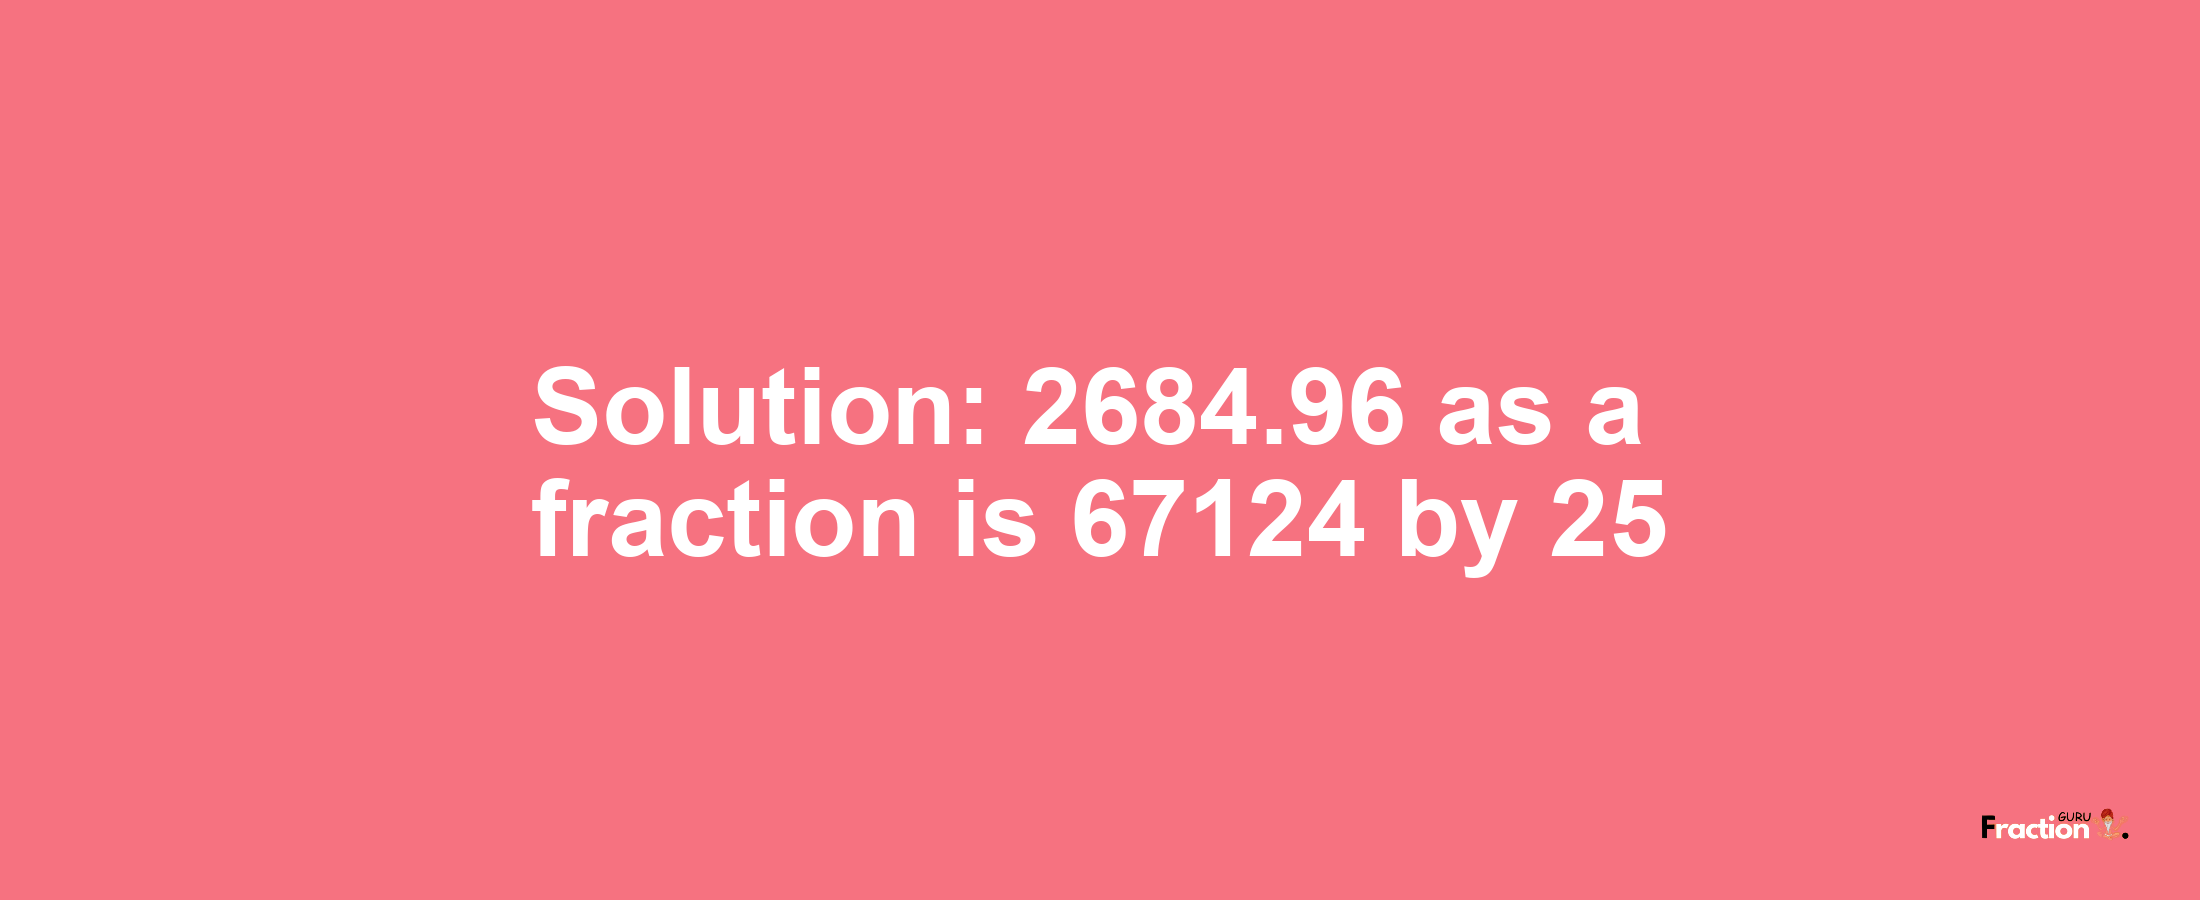 Solution:2684.96 as a fraction is 67124/25